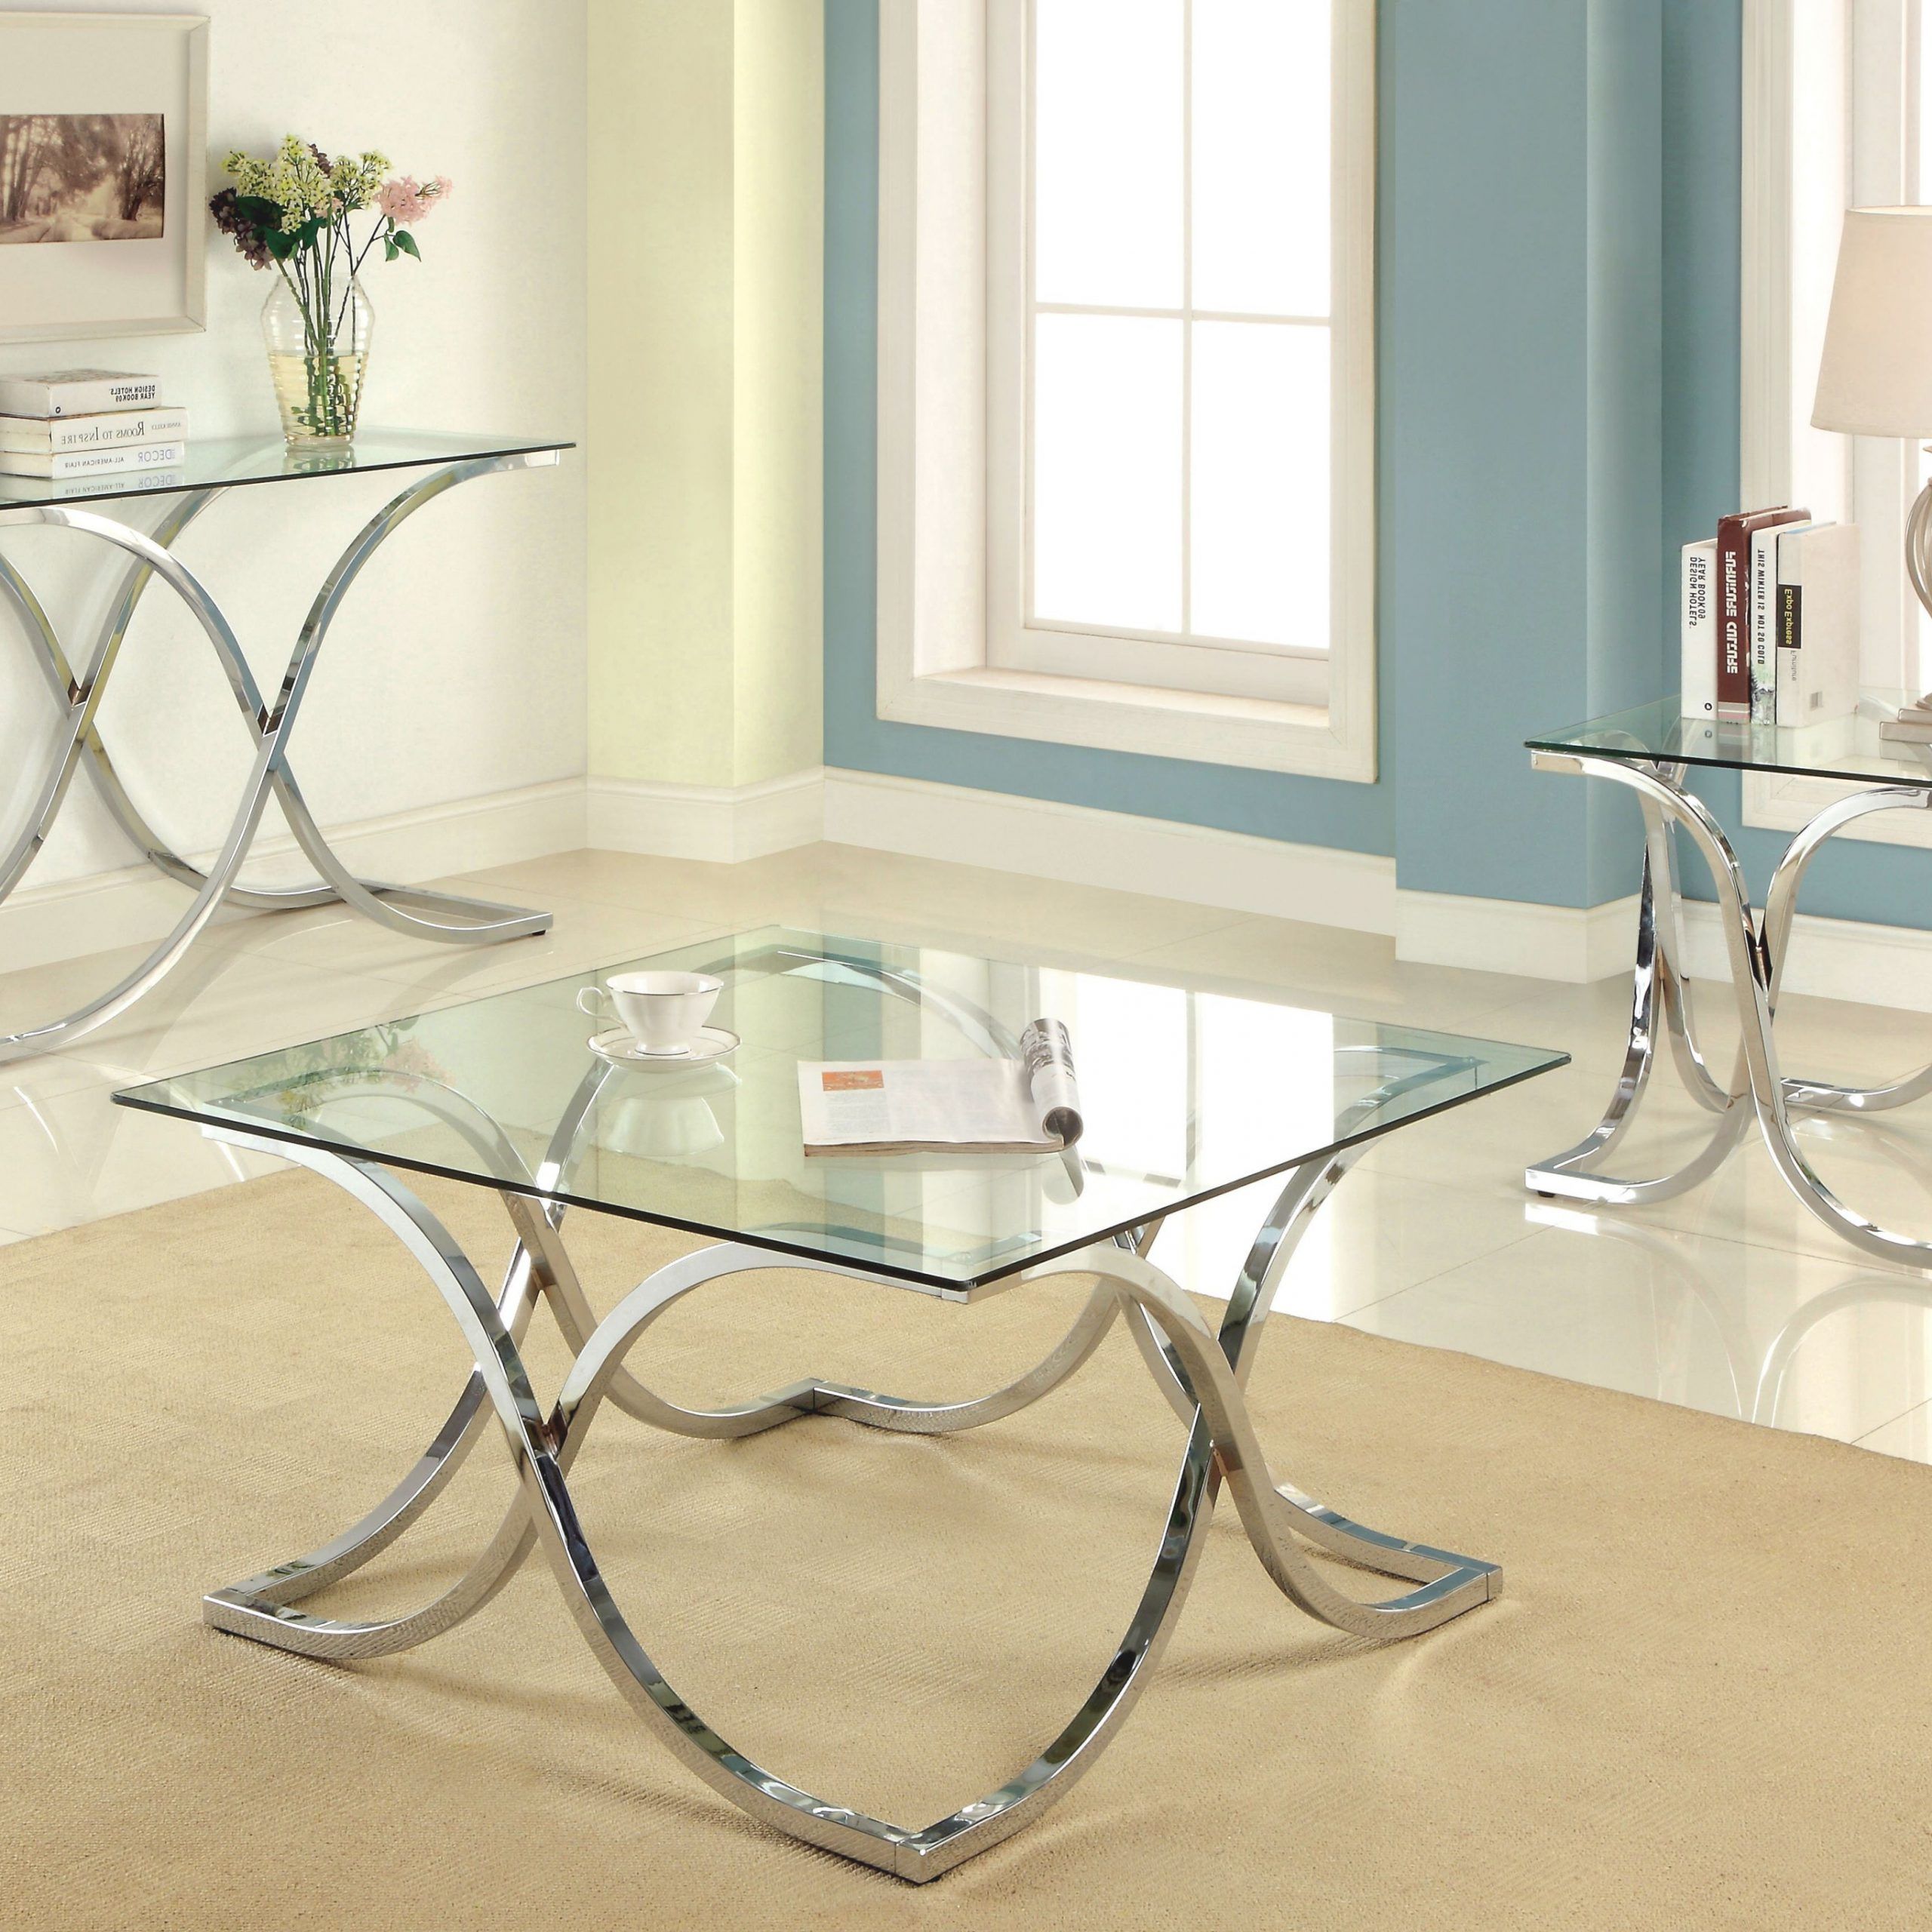 3 Piece Coffee Tables Inside Trendy Elegant 3 Piece Glass Coffee Table Set – Awesome Decors (View 3 of 20)